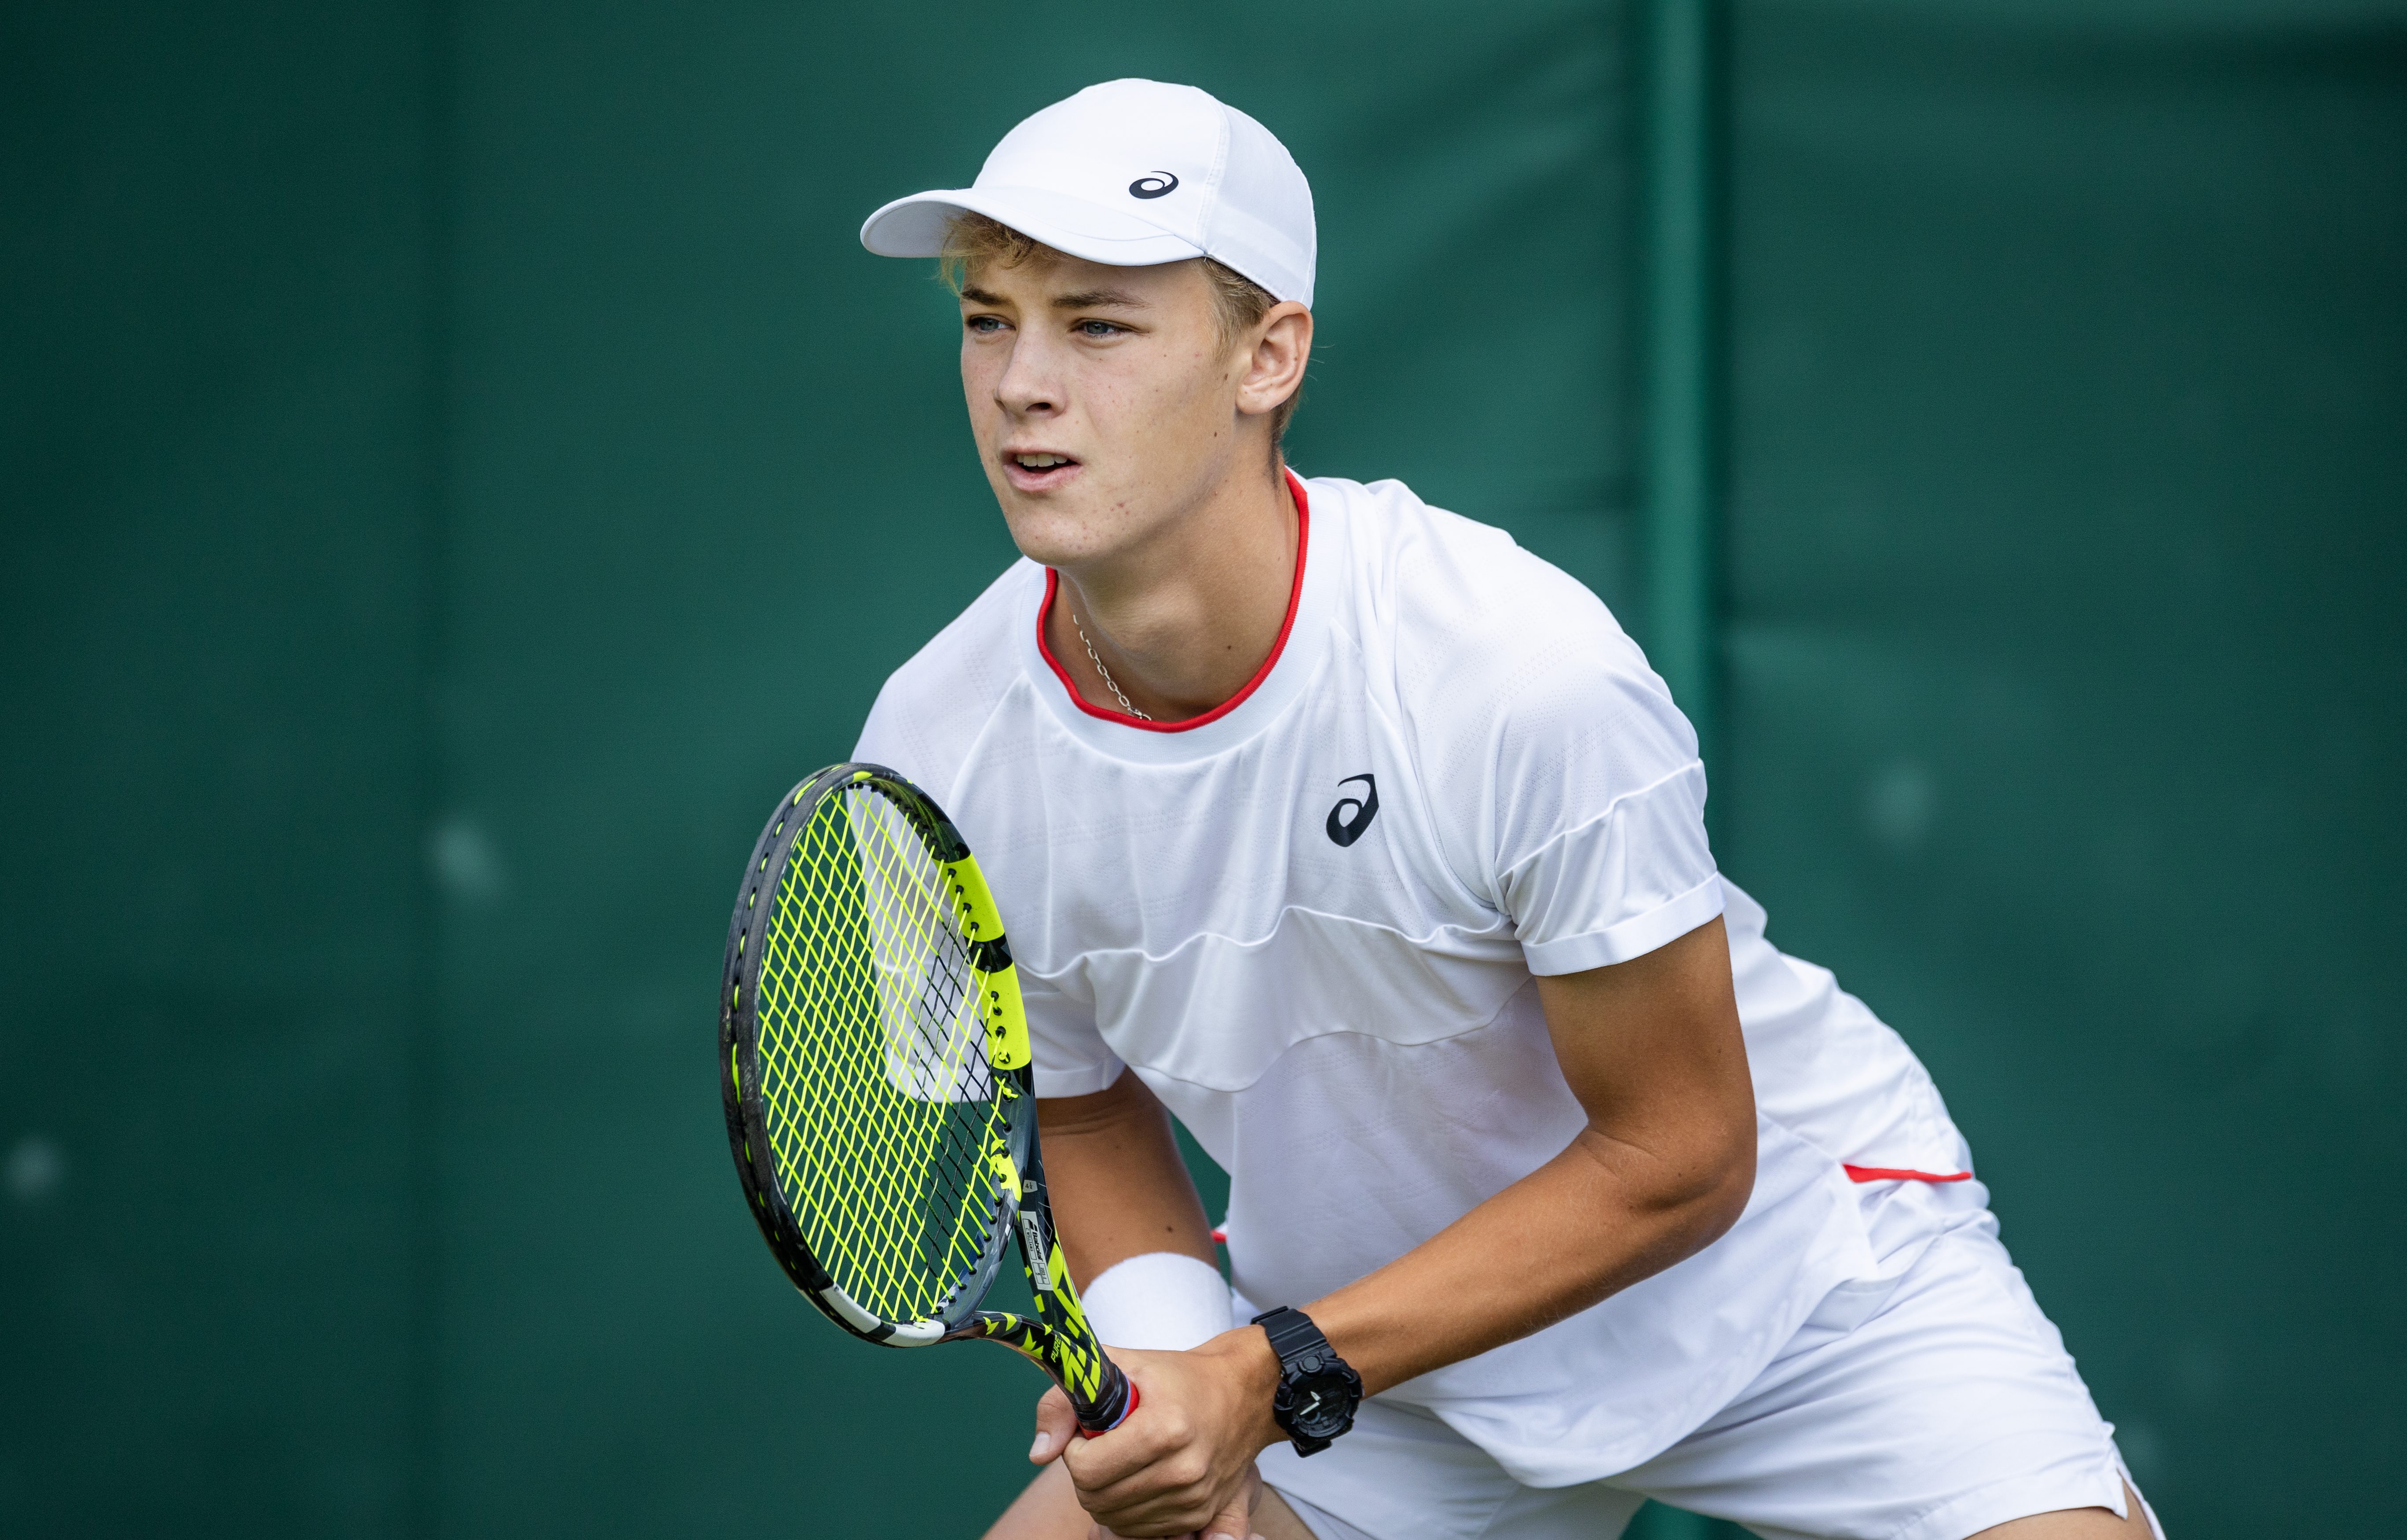 New York's Cooper Williams enters Jr. US Open as top-ranked American – NBC  New York